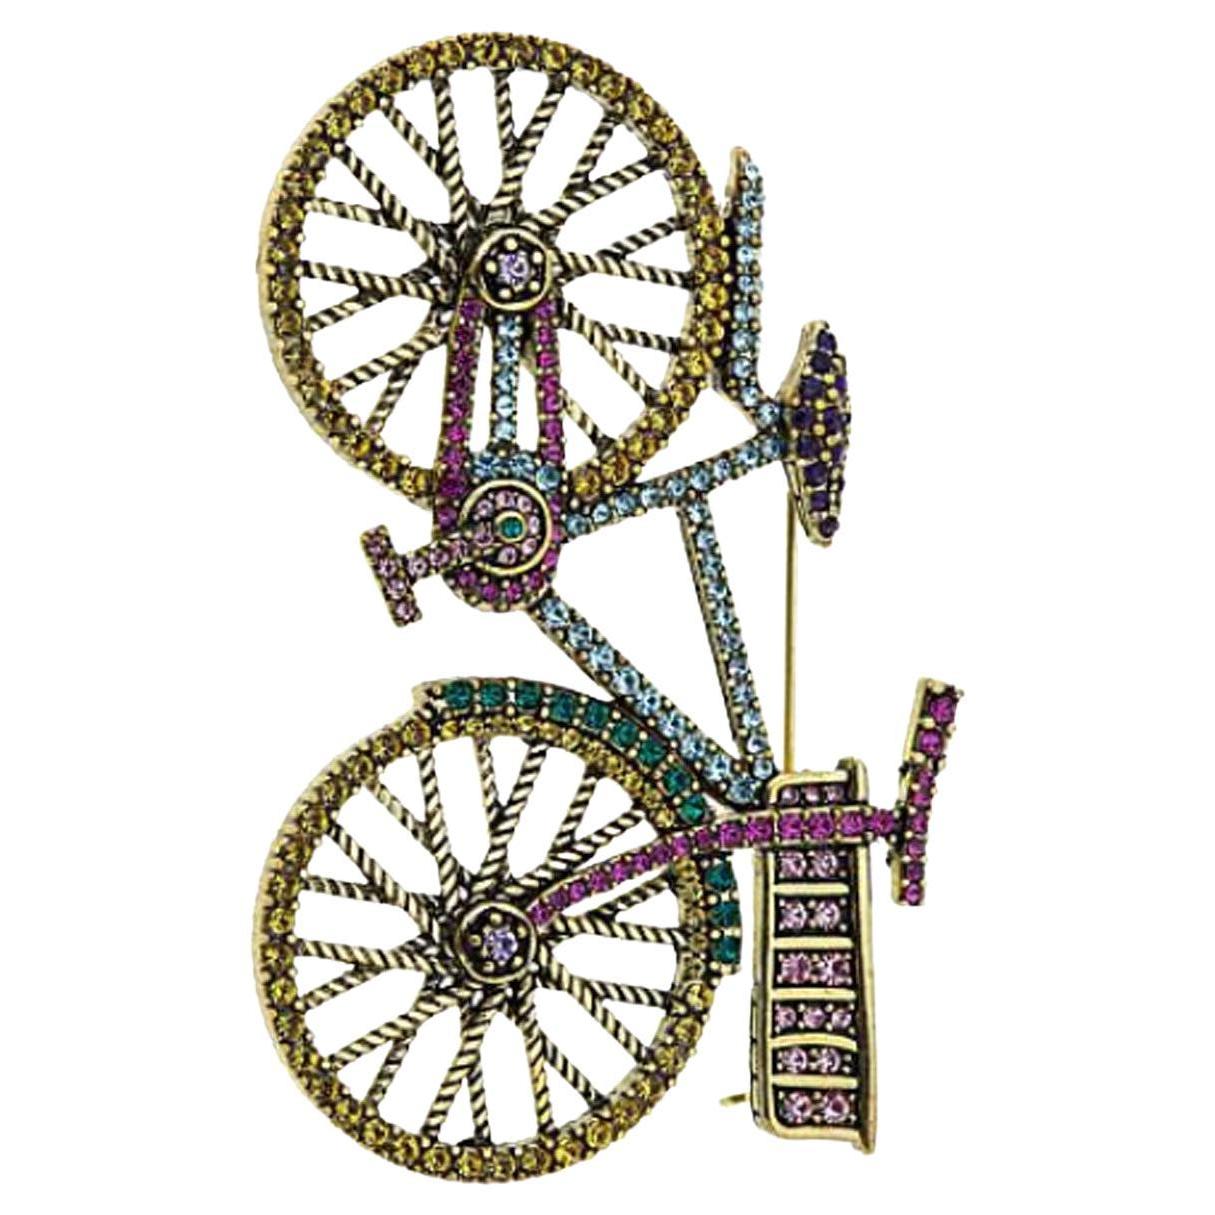 Heidi Daus Pedal Perfection Crystal Accented Bicycle Pin Brooch Magnificent Must Have Piece!!
Detailed, colorful, crystal encrusted bicycle with basket. Measures approx. 1-3/4